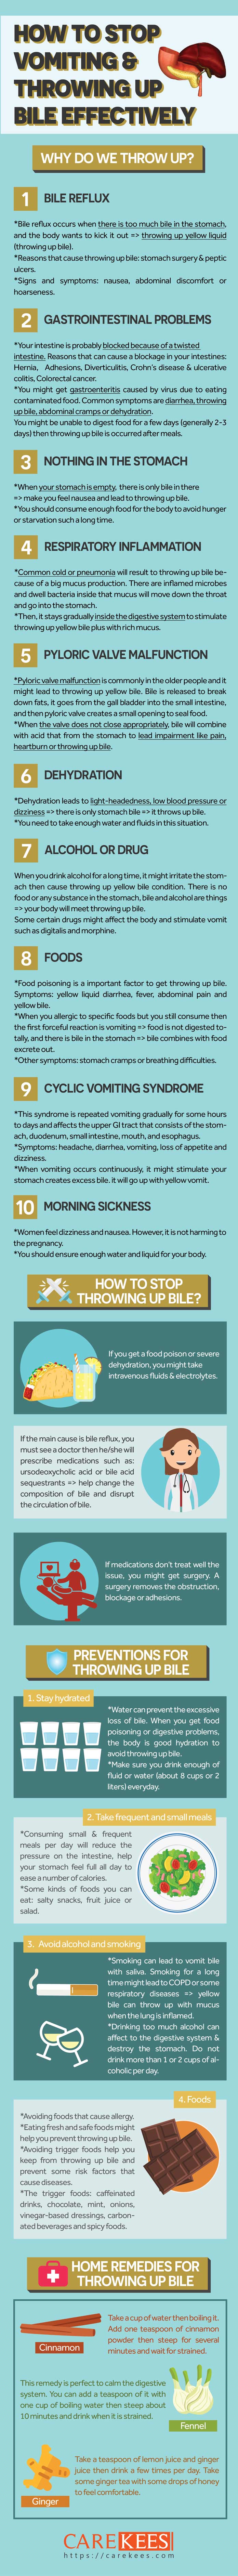 Effective ways to prevent vomiting and throwing up bile effectively